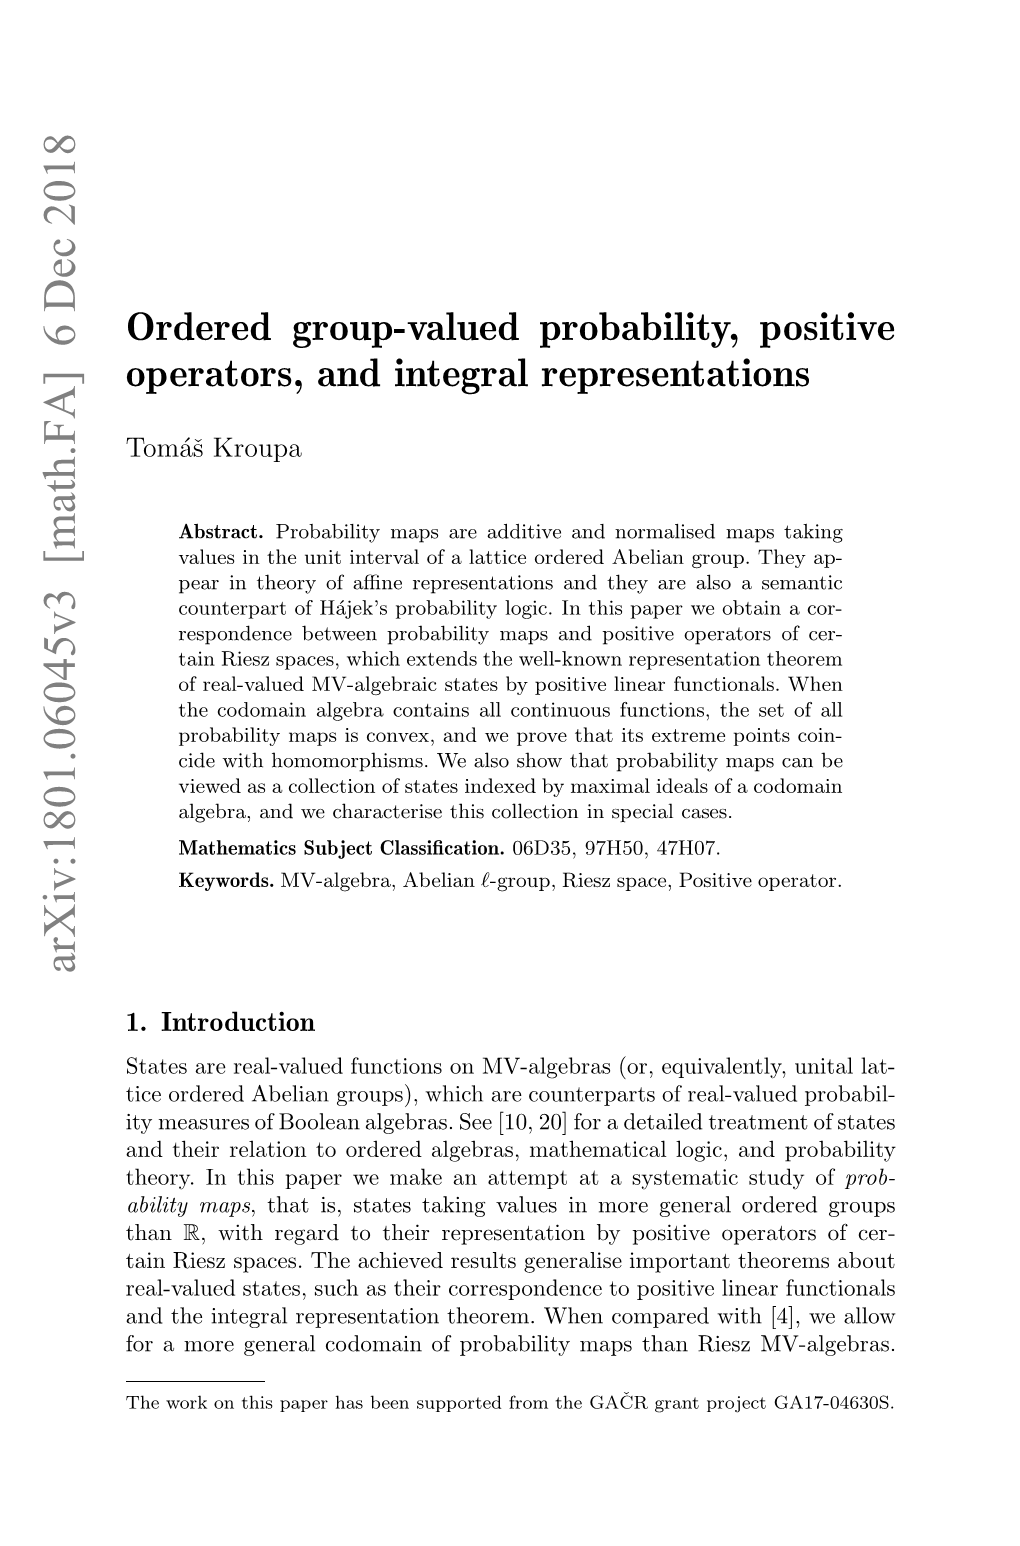 Ordered Group-Valued Probability, Positive Operators, And